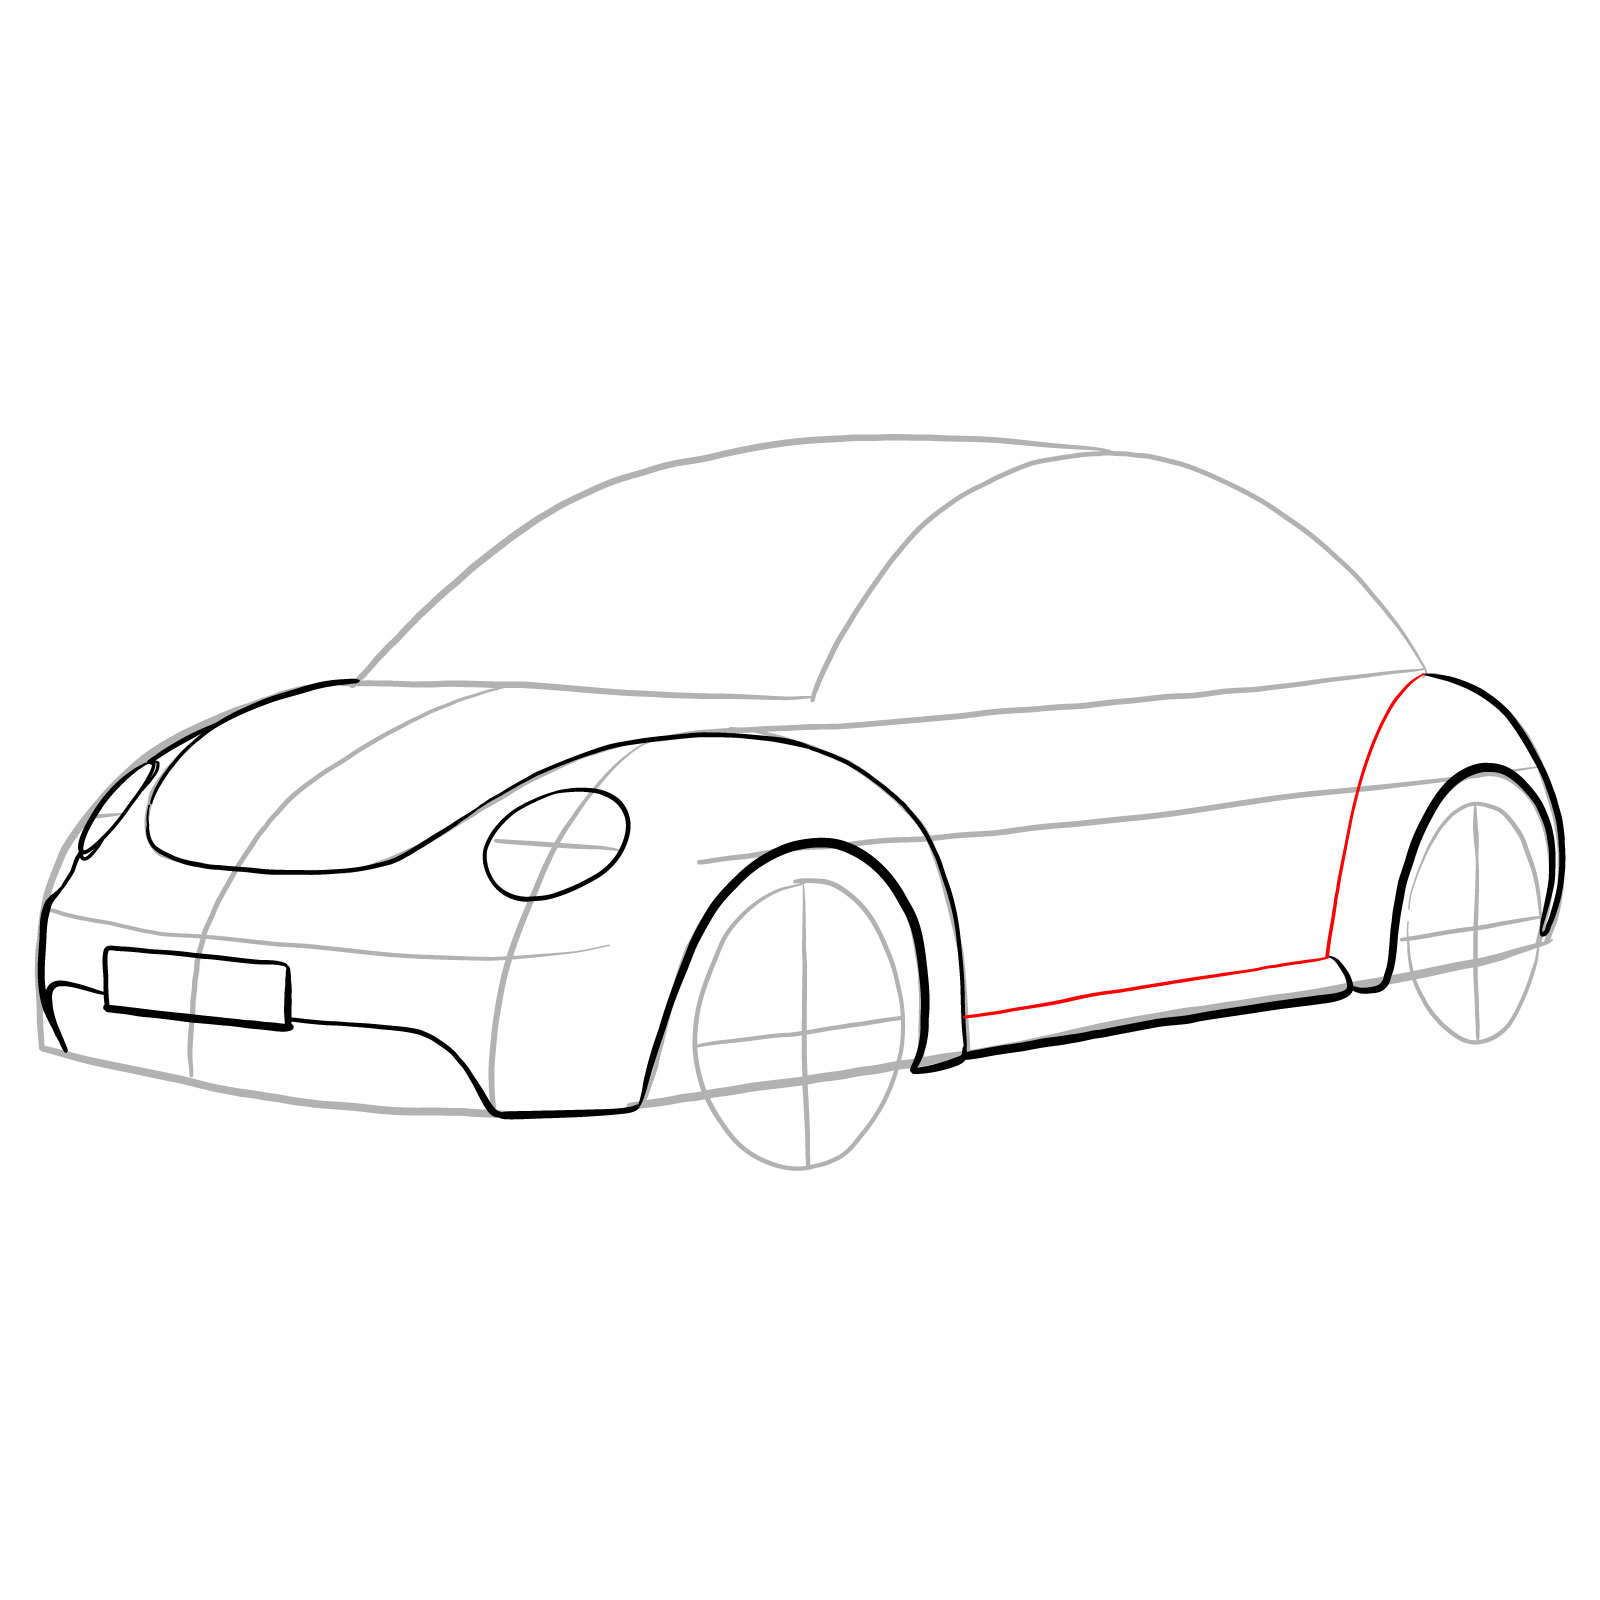 How to draw Volkswagen New Beetle - step 12